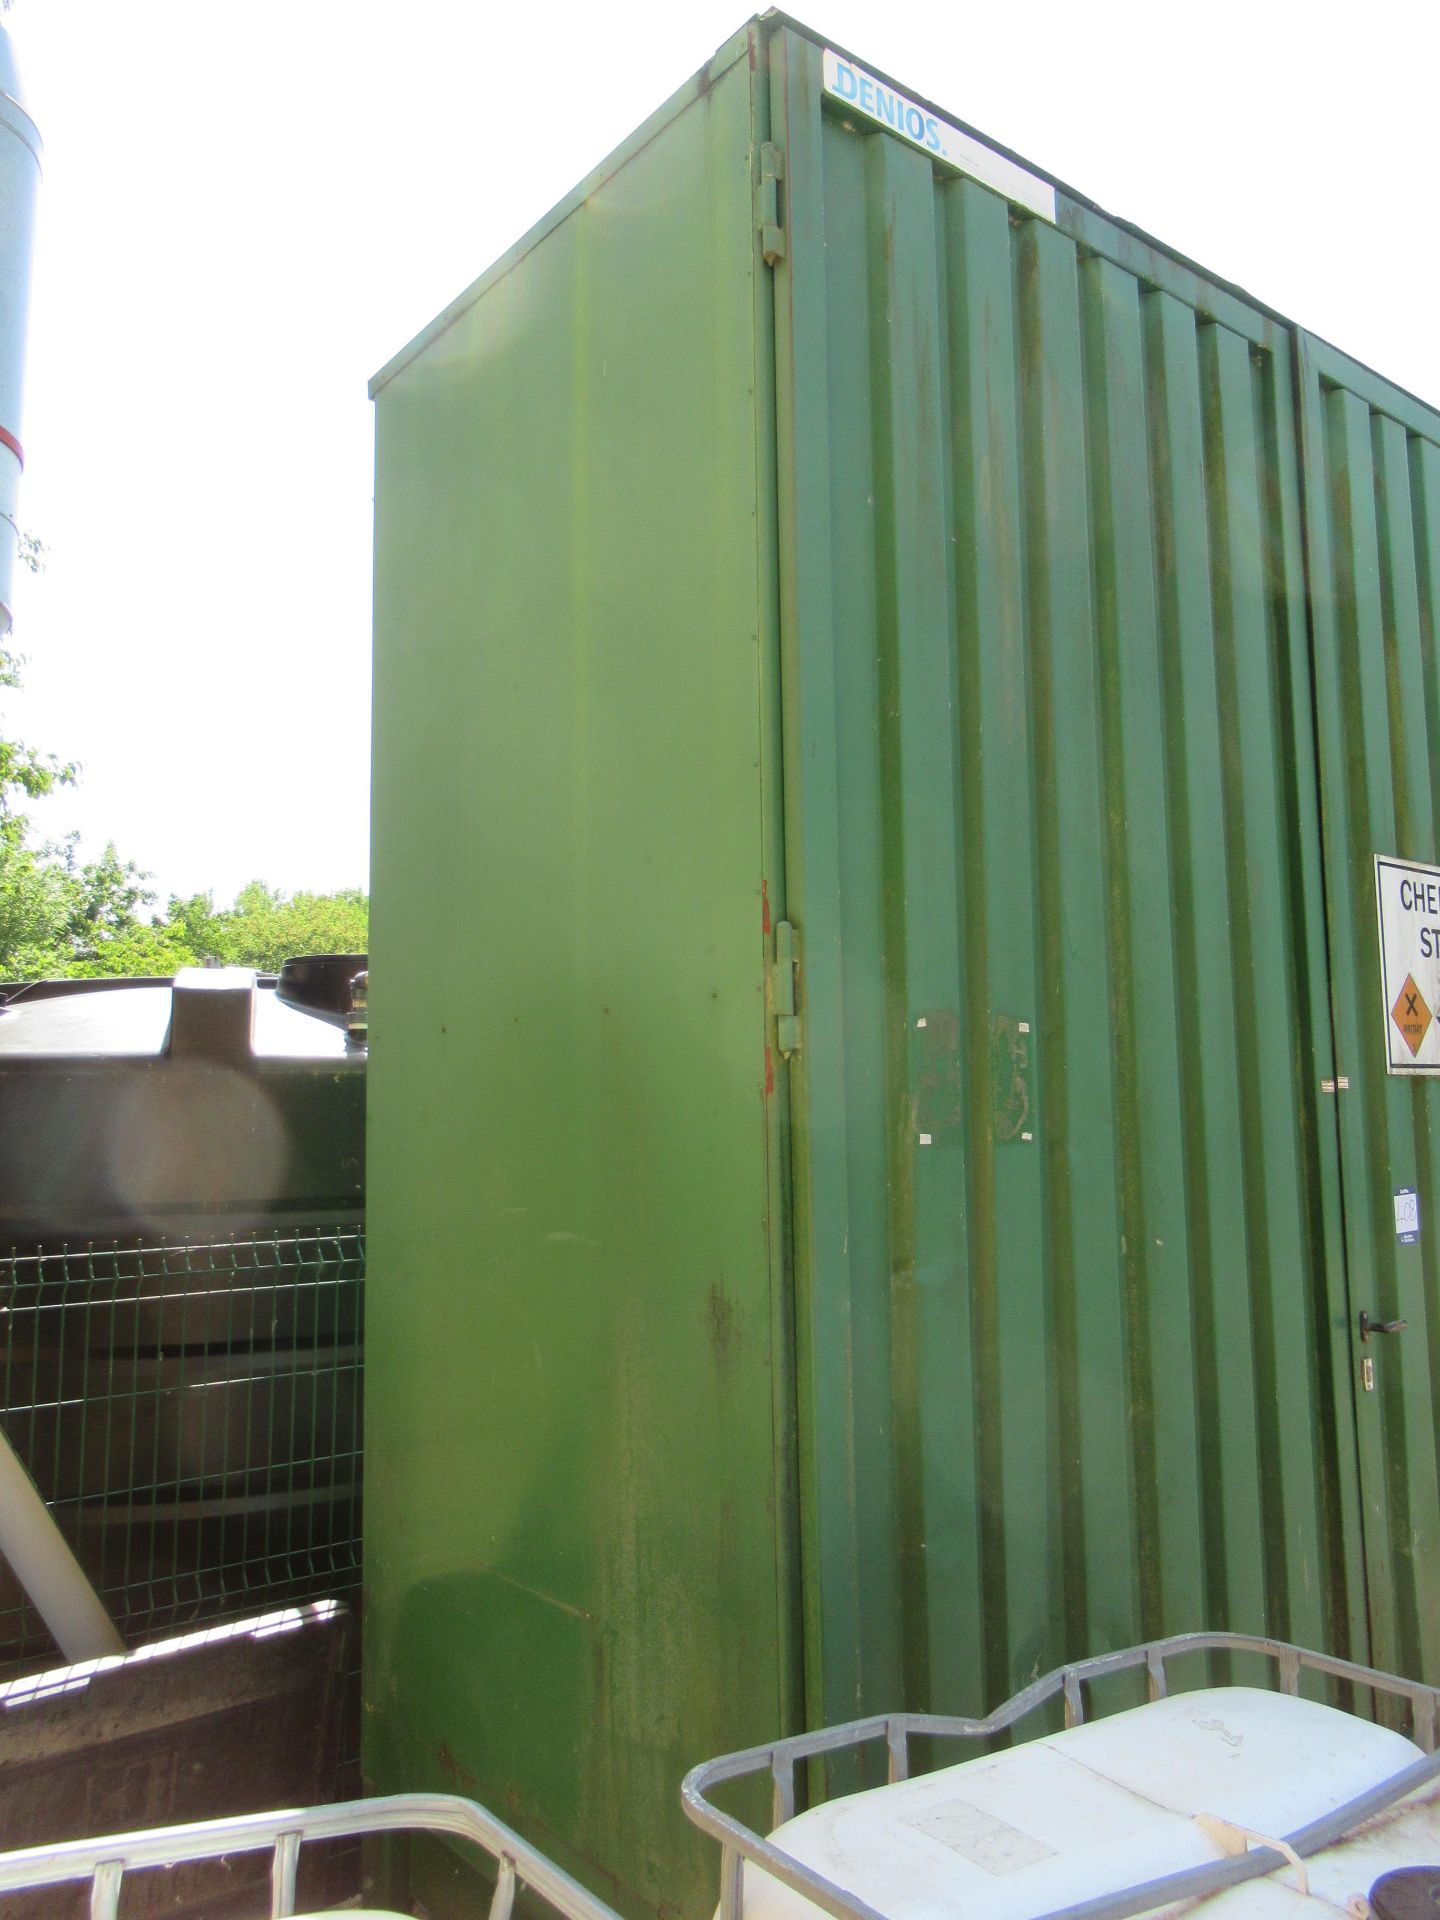 Denios steel chemical storage container external dimensions 3120mm wide x 1480mm deep x 3500mm high - Image 3 of 4